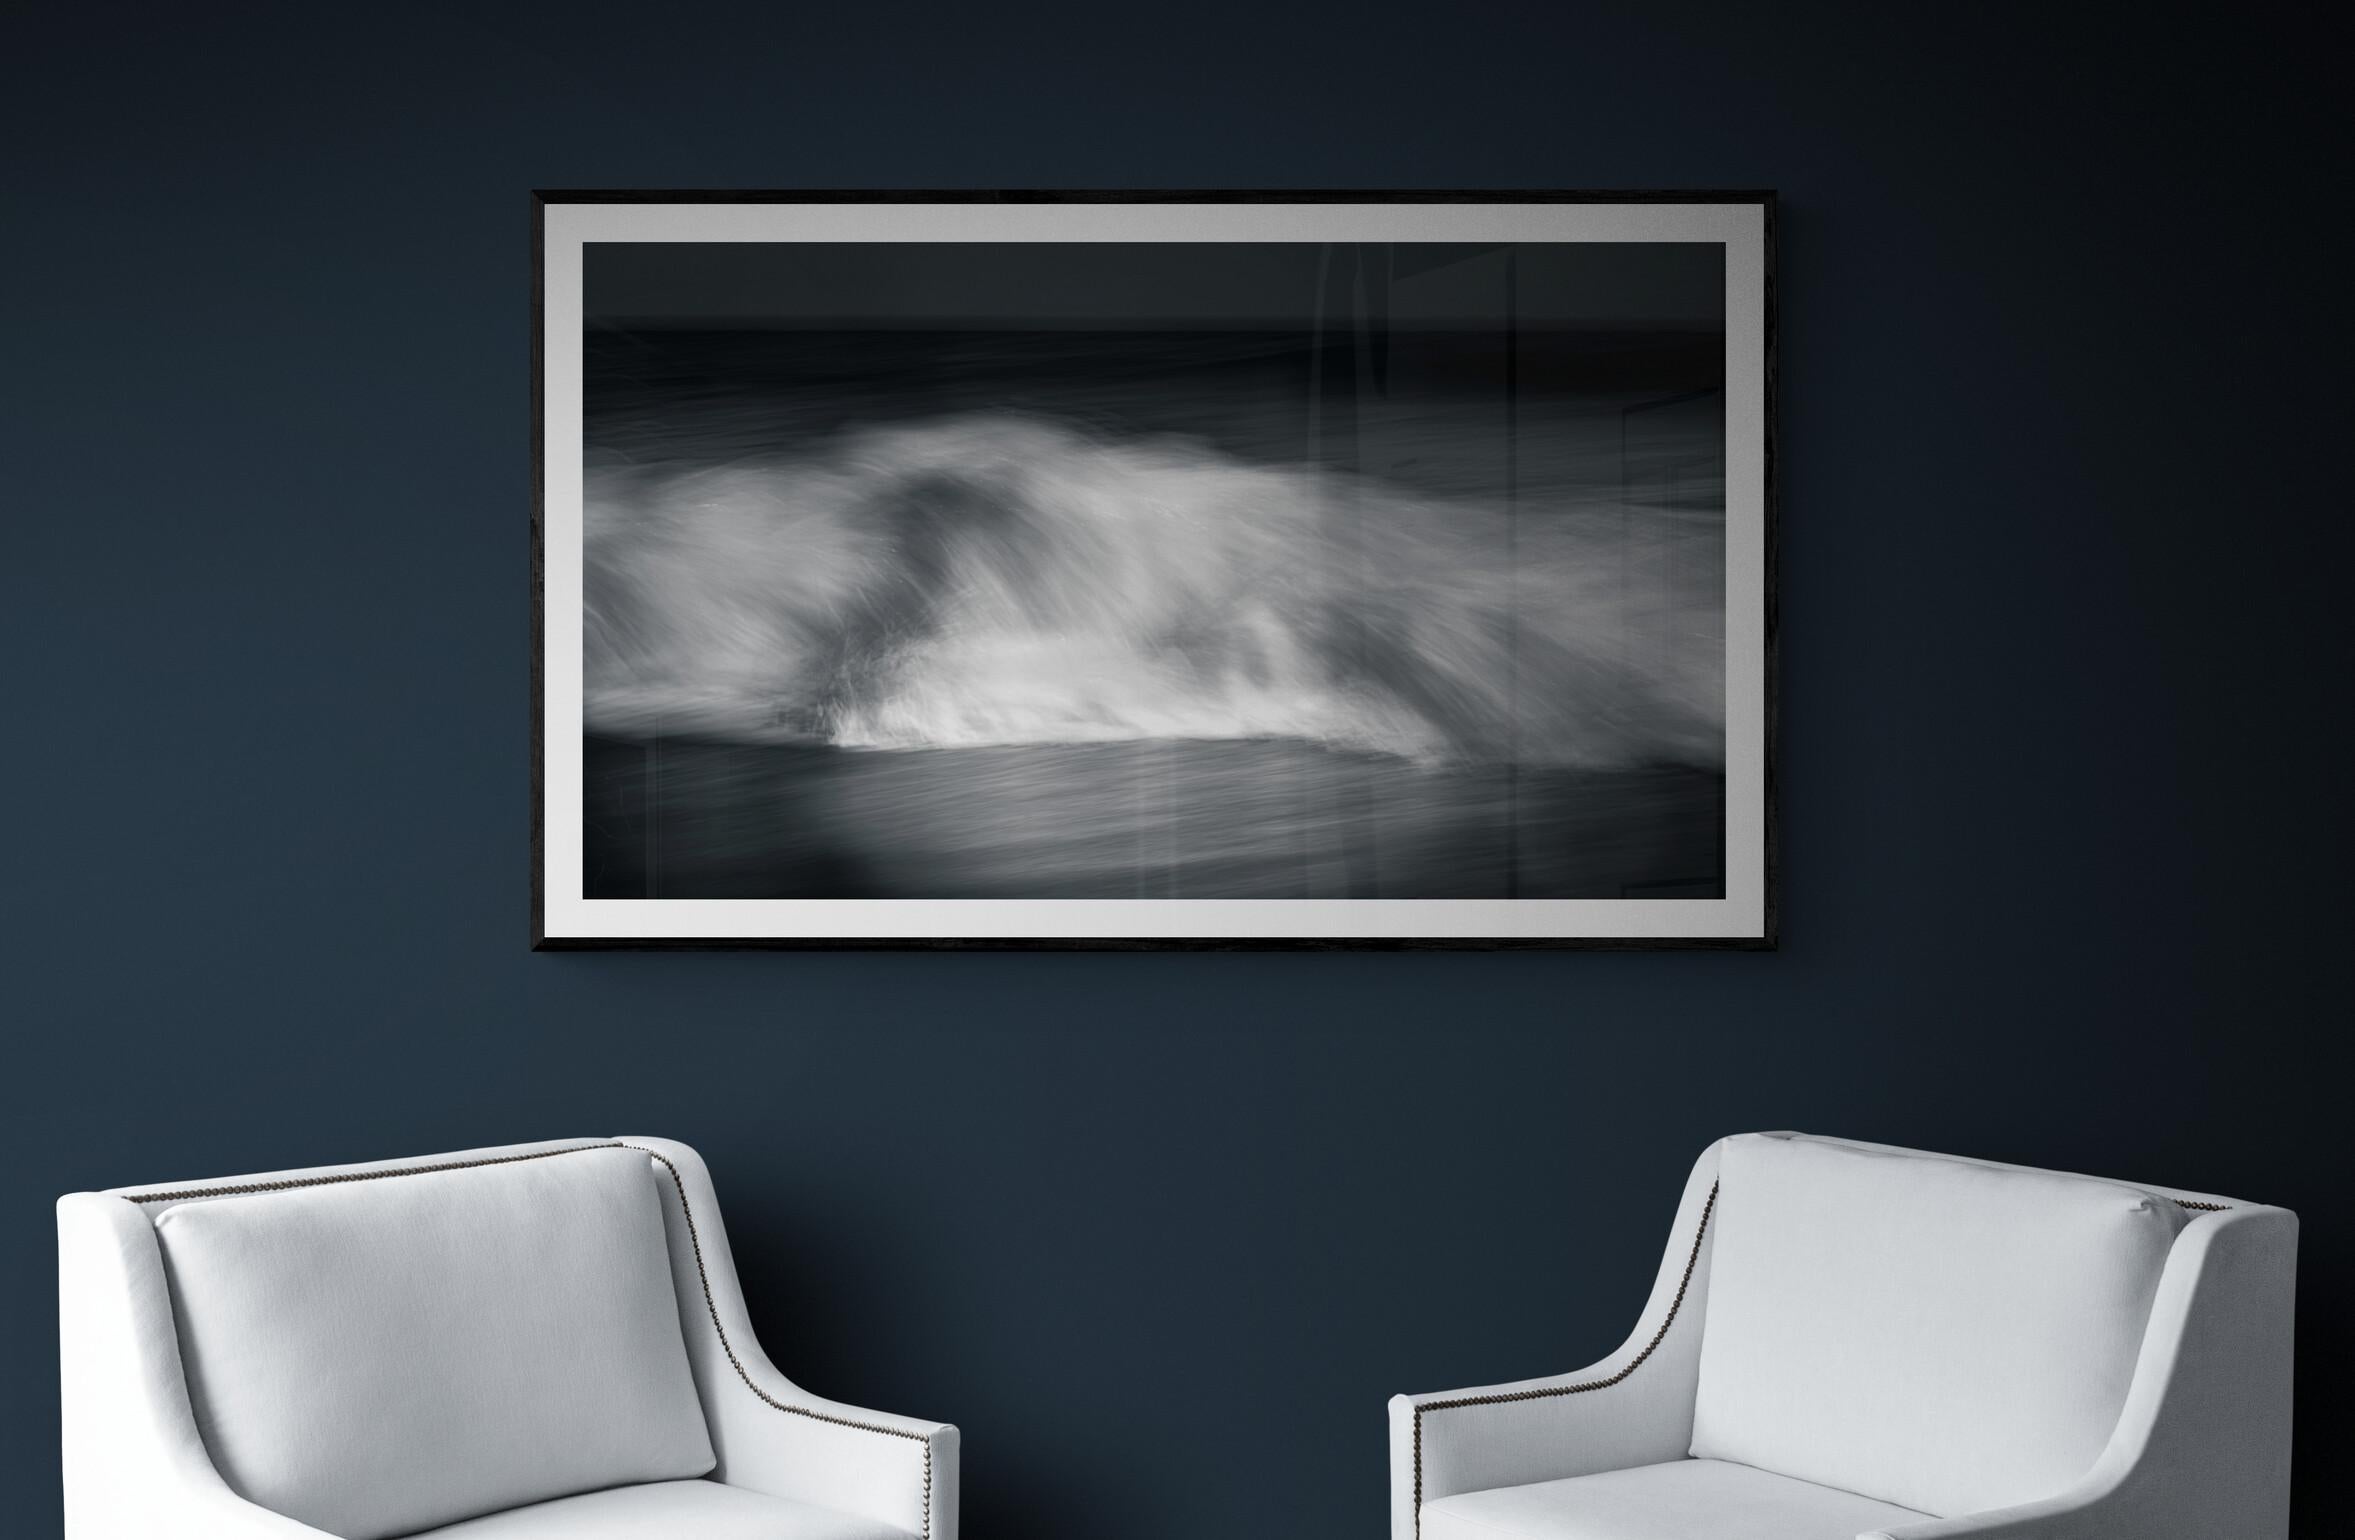 Limited Edition 1 / 7 Black and White Photograph Seascape - Kinetic #37 For Sale 3